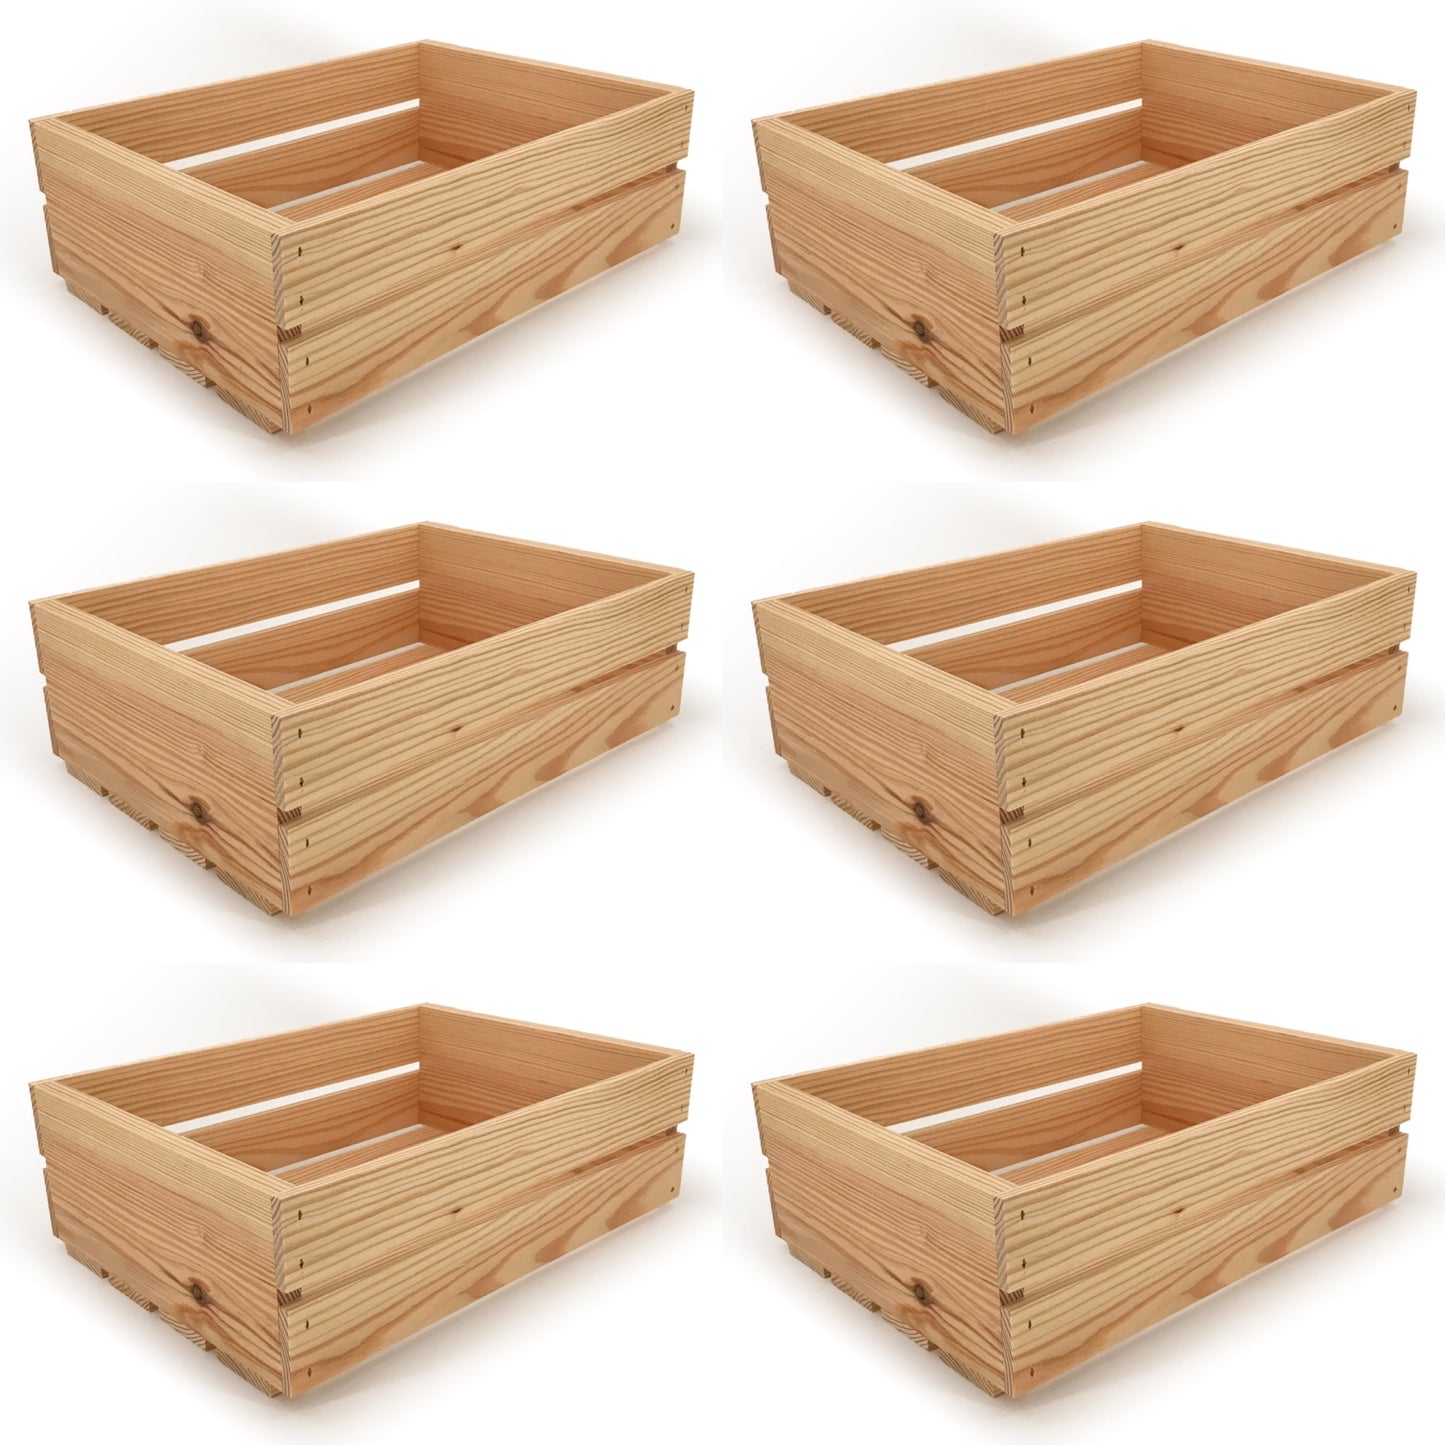 6 Small wooden crates 16x12x5.25, 6-WS-16-12-5.25-NX-NW-NL, 12-WS-16-12-5.25-NX-NW-NL, 24-WS-16-12-5.25-NX-NW-NL, 48-WS-16-12-5.25-NX-NW-NL, 96-WS-16-12-5.25-NX-NW-NL